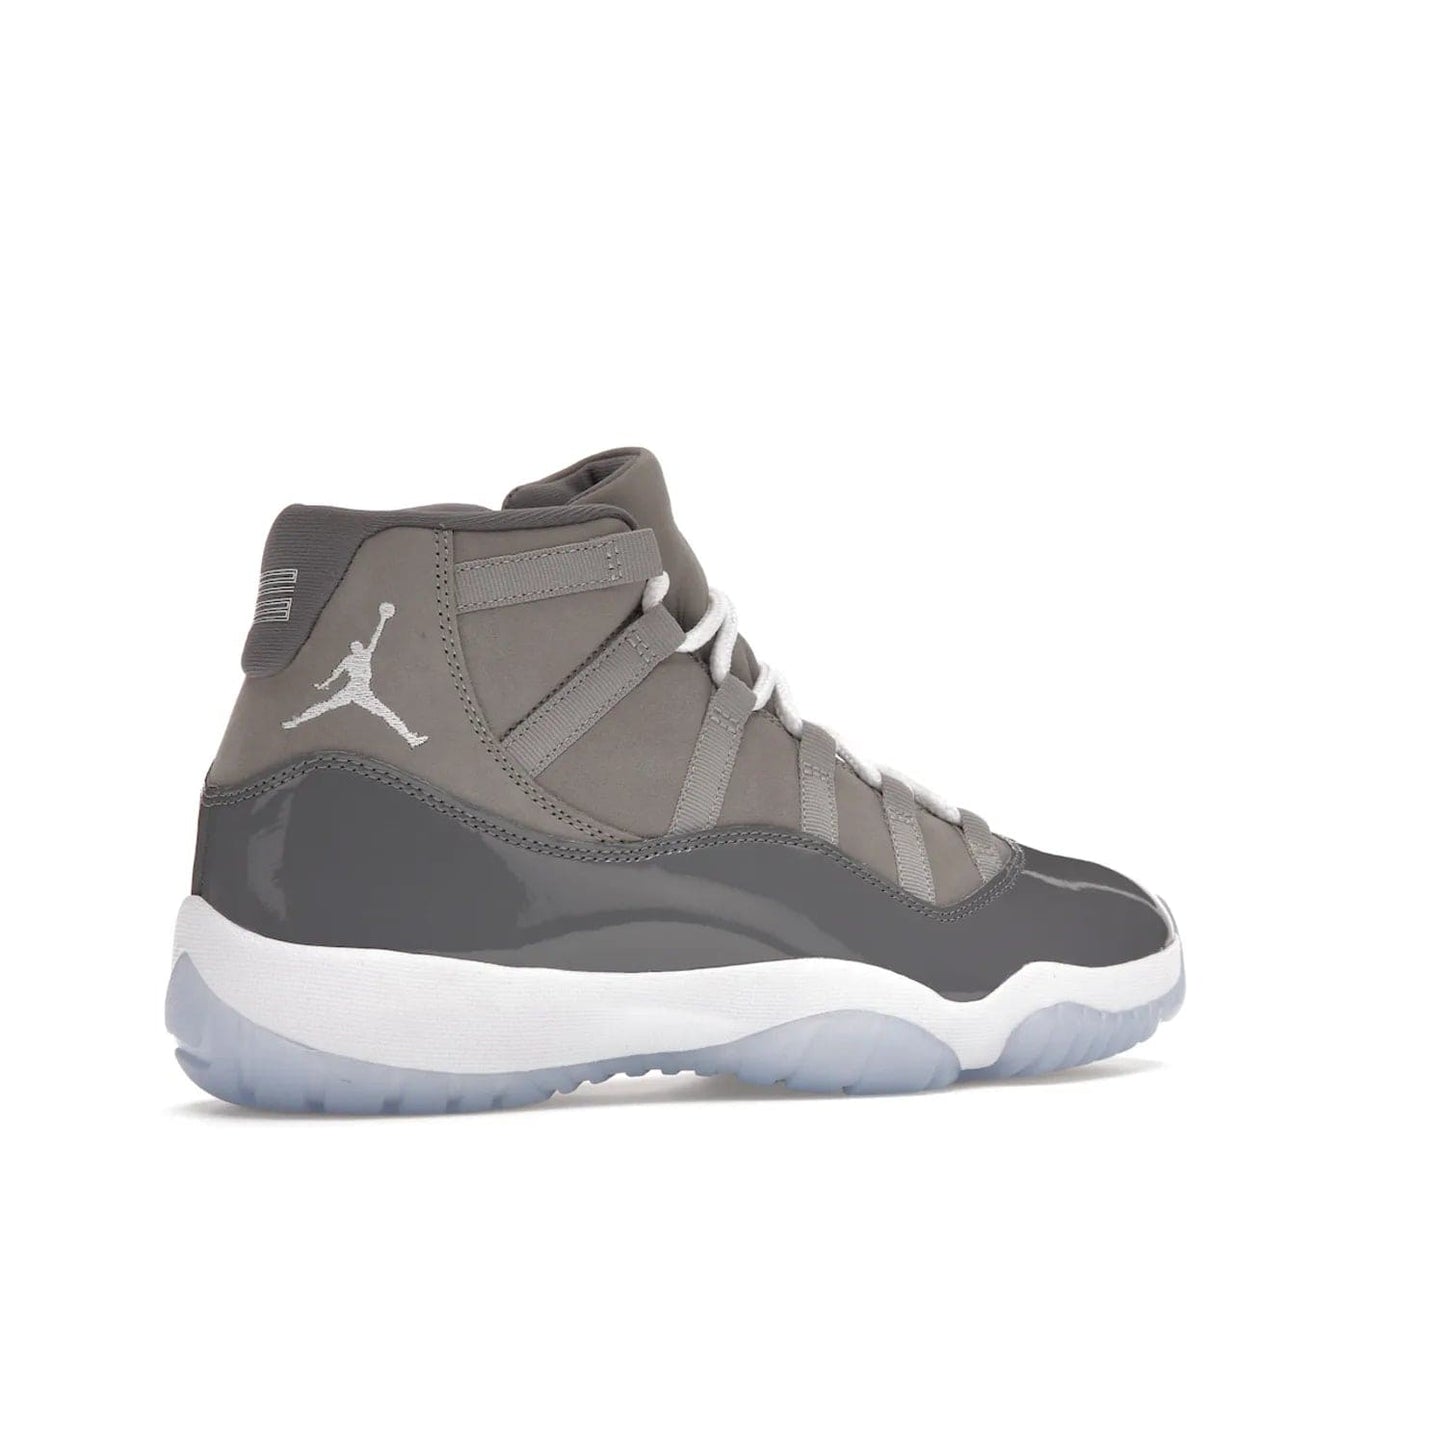 Jordan 11 Retro Cool Grey (2021) - Image 34 - Only at www.BallersClubKickz.com - Shop the Air Jordan 11 Retro Cool Grey (2021) for a must-have sneaker with a Cool Grey Durabuck upper, patent leather overlays, signature Jumpman embroidery, a white midsole, icy blue translucent outsole, and Multi-Color accents.  Released in December 2021 for $225.